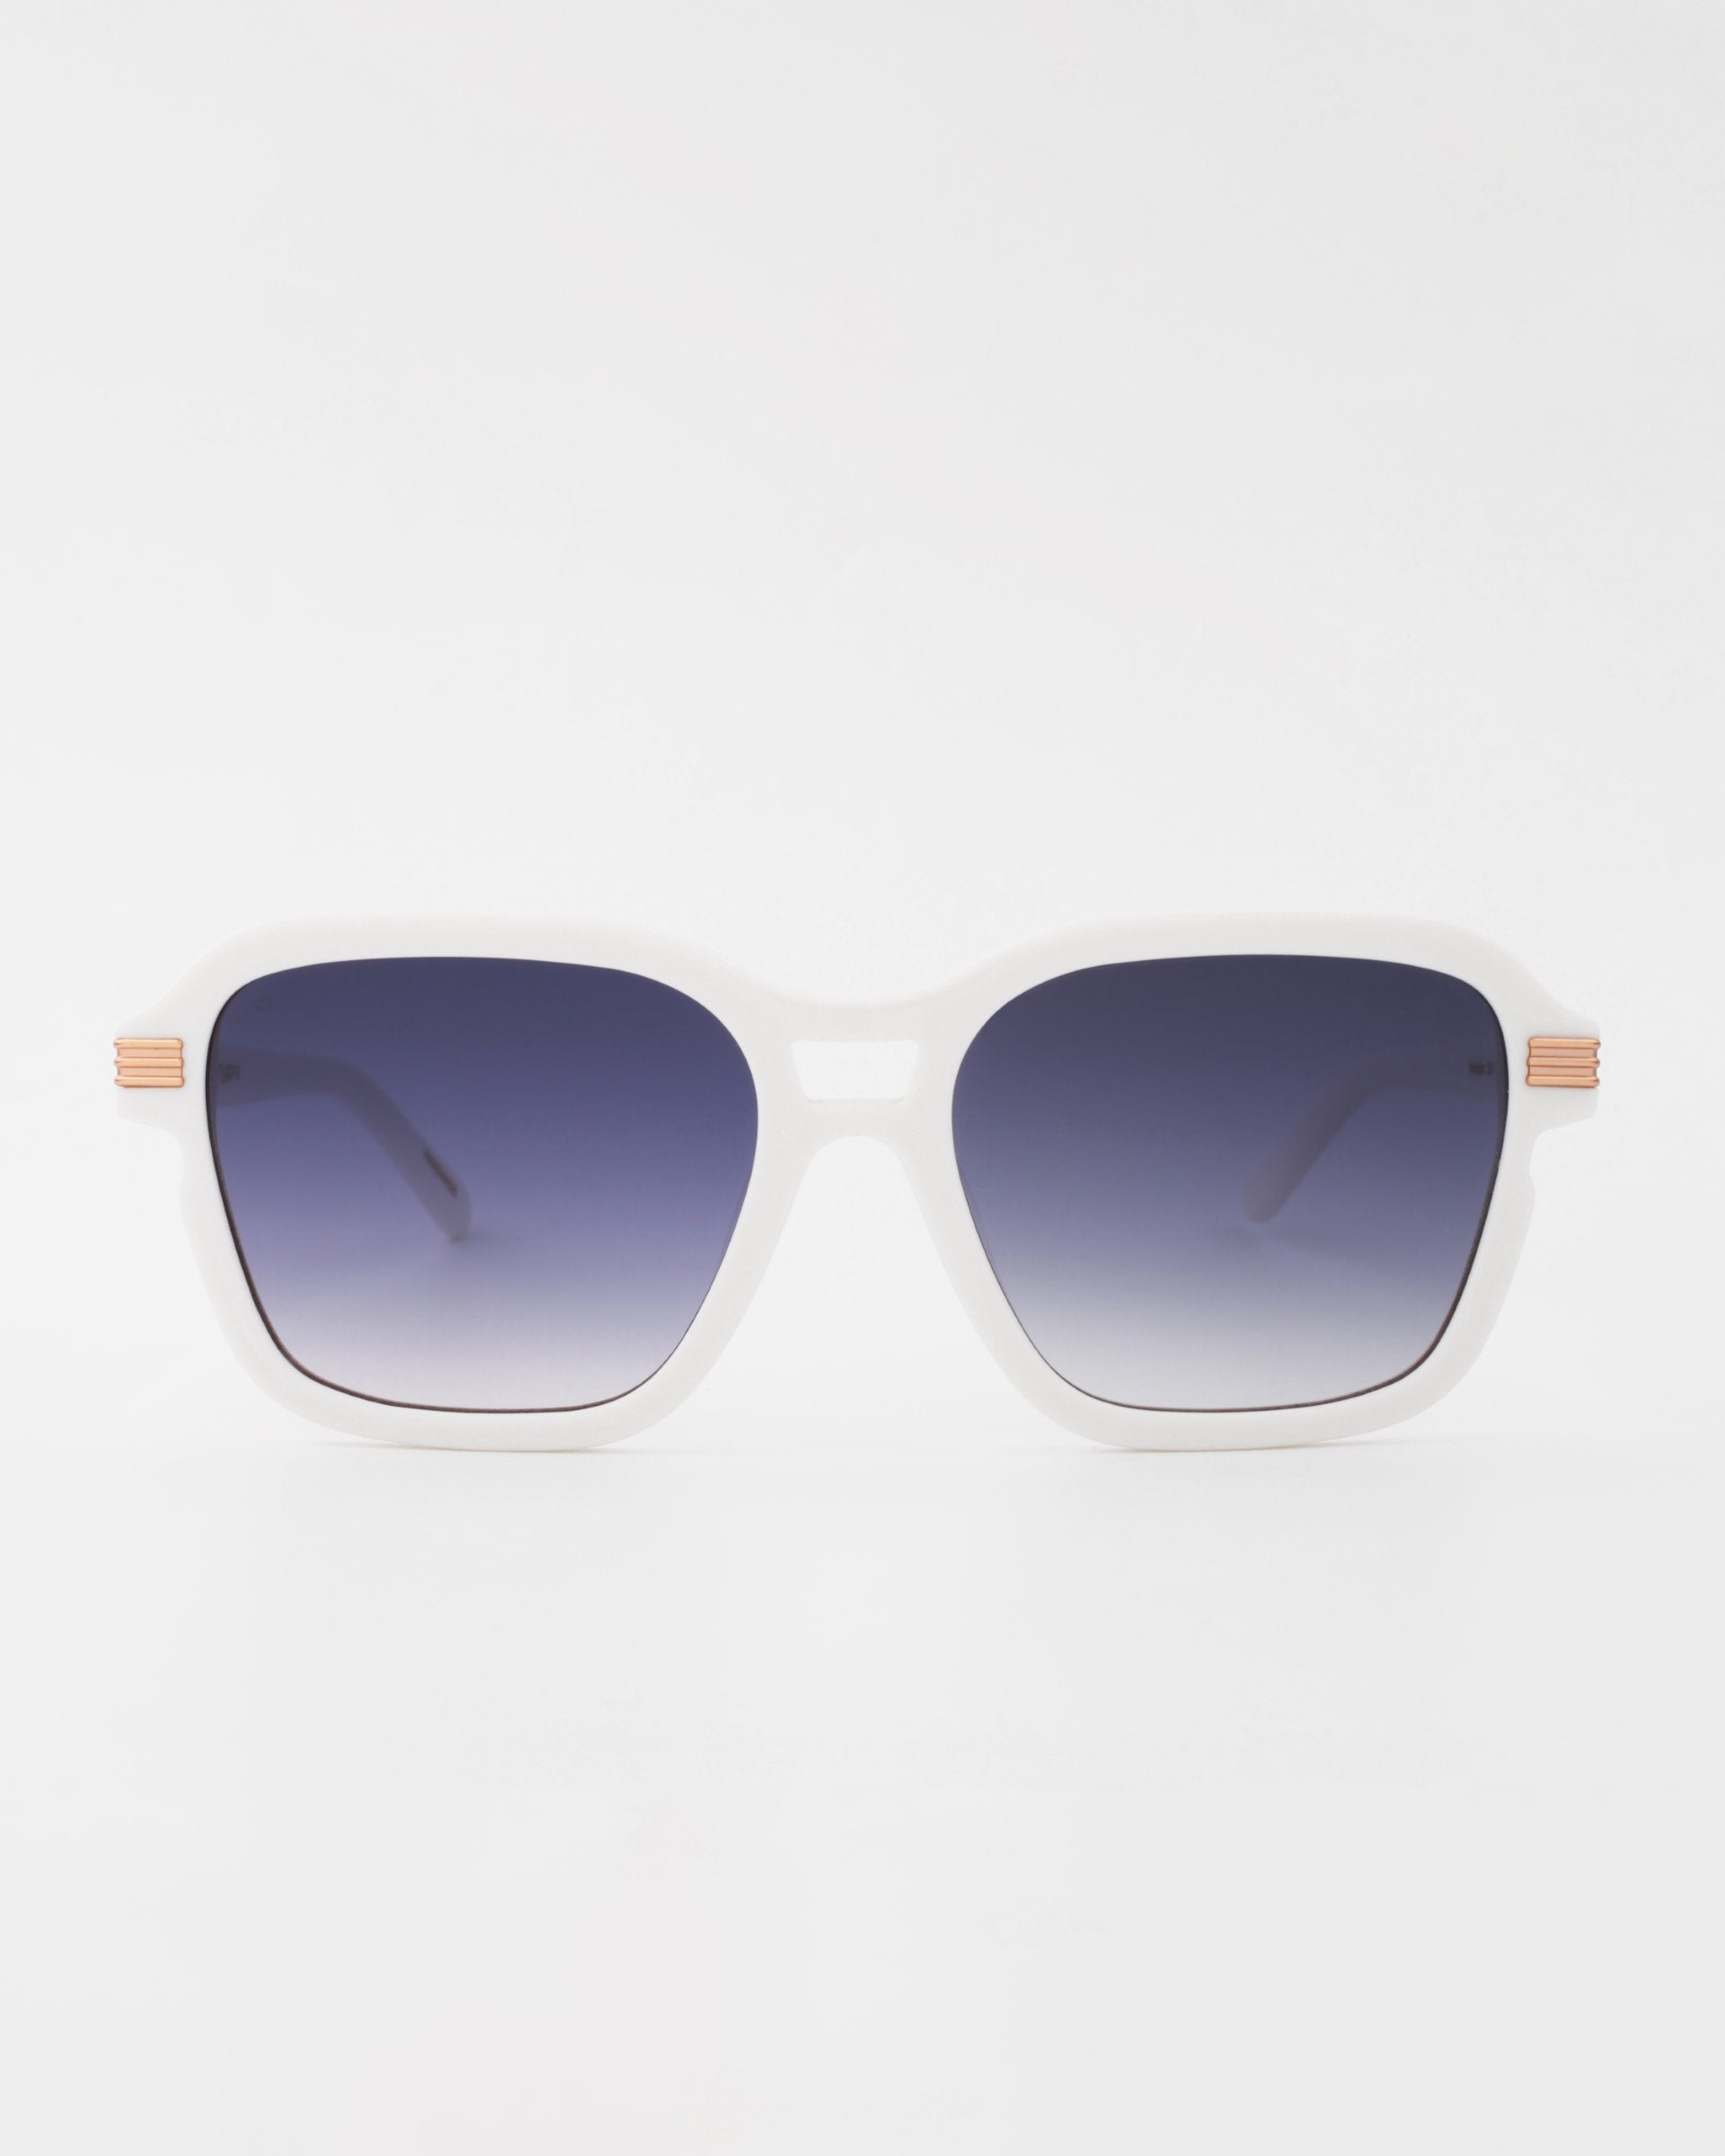 A pair of For Art's Sake® Shadyside sunglasses with shatter-resistant nylon lenses and gold-plated temple details, displayed against a plain white background.